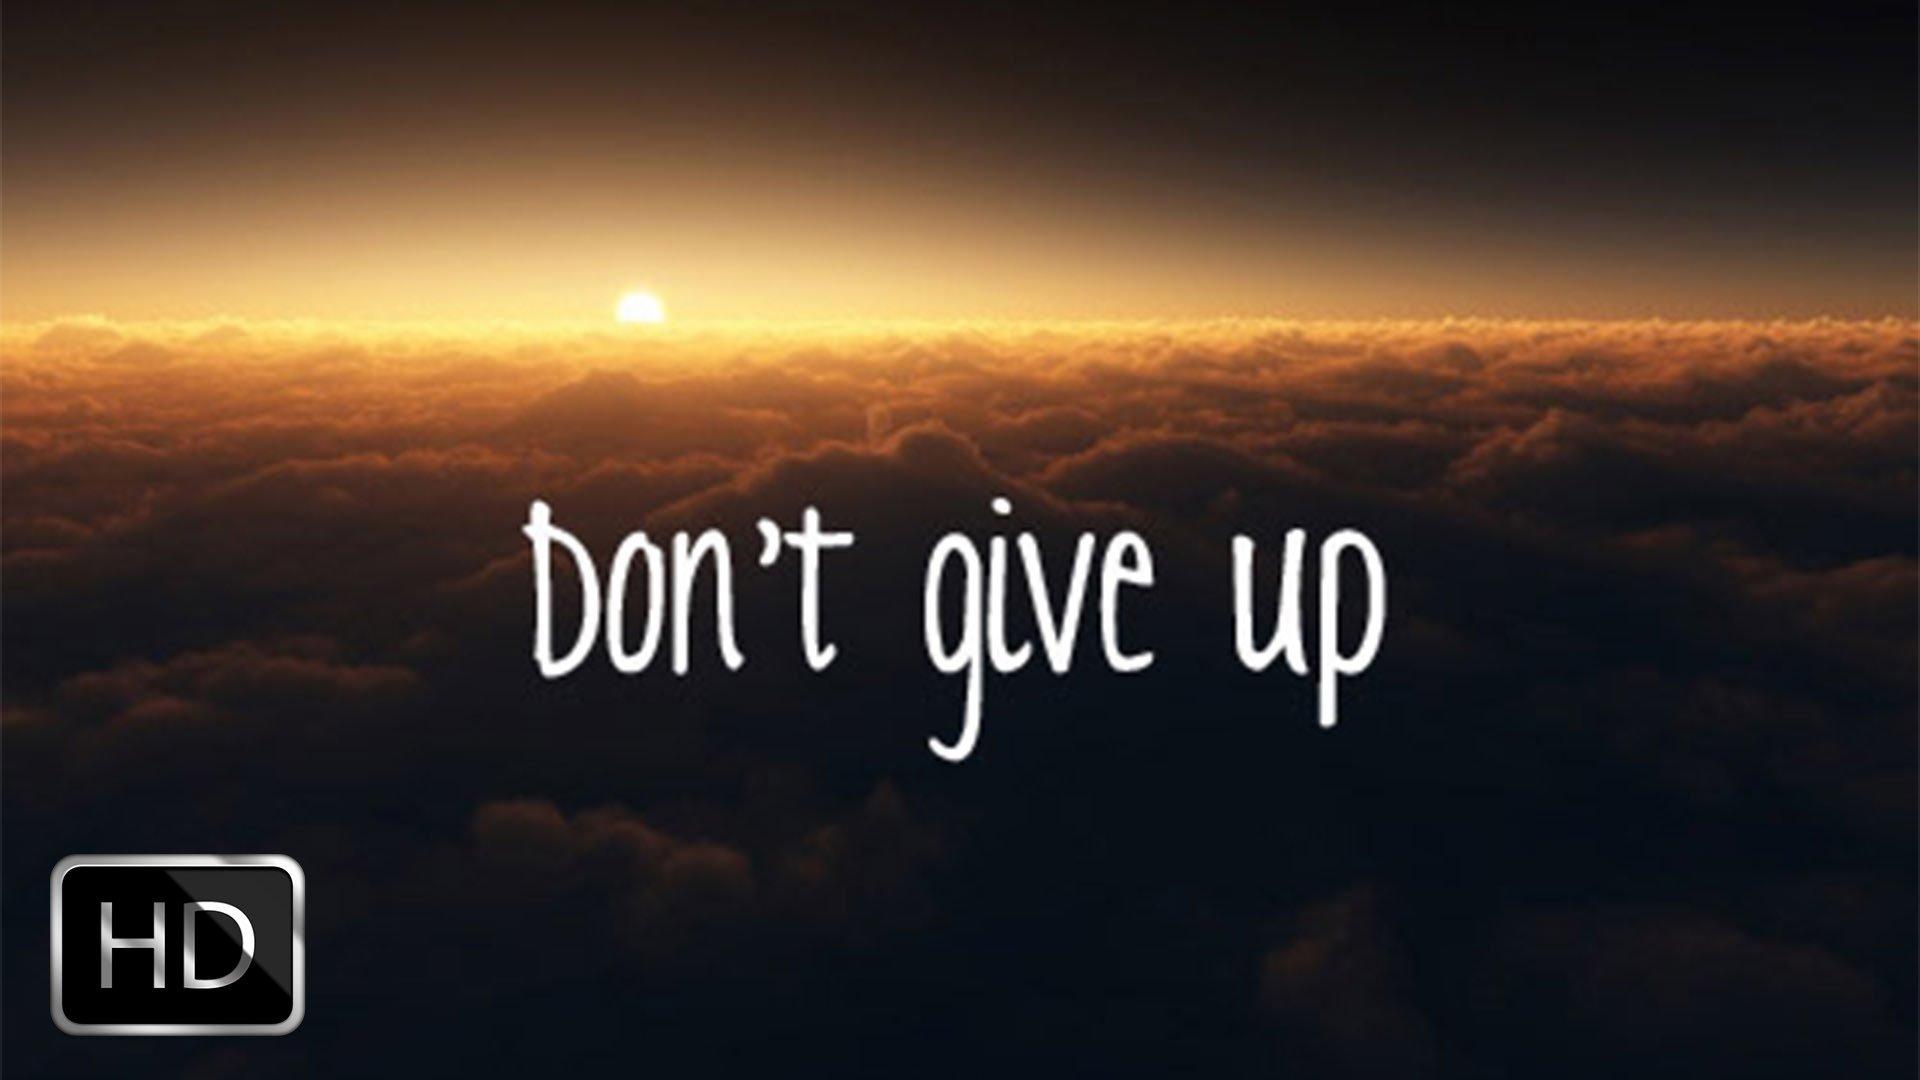 Dont give up wallpaper | 1920x1080 | #10301